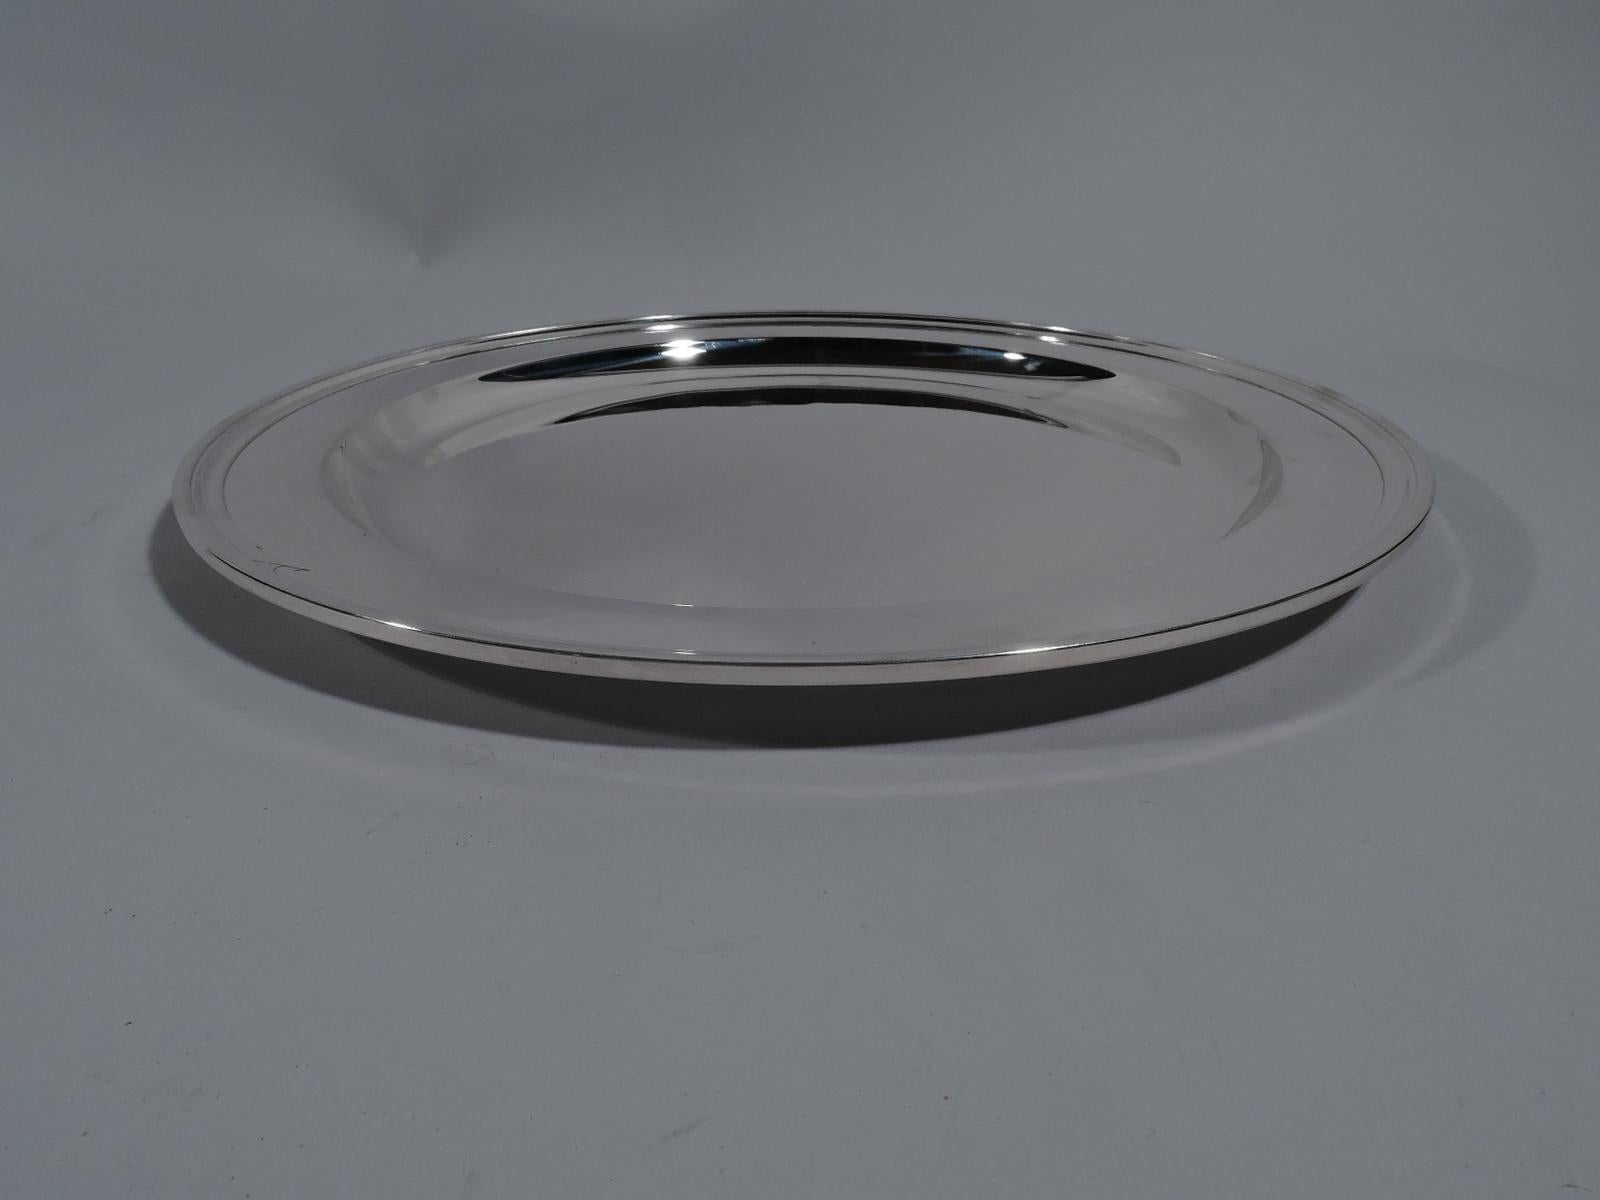 Modern sterling silver serving tray. Made by Tiffany & Co. in New York. Round with deep well and molded rim. Fully marked including pattern no. 20187. Weight: 22 troy ounces. Measure: 12 inch.